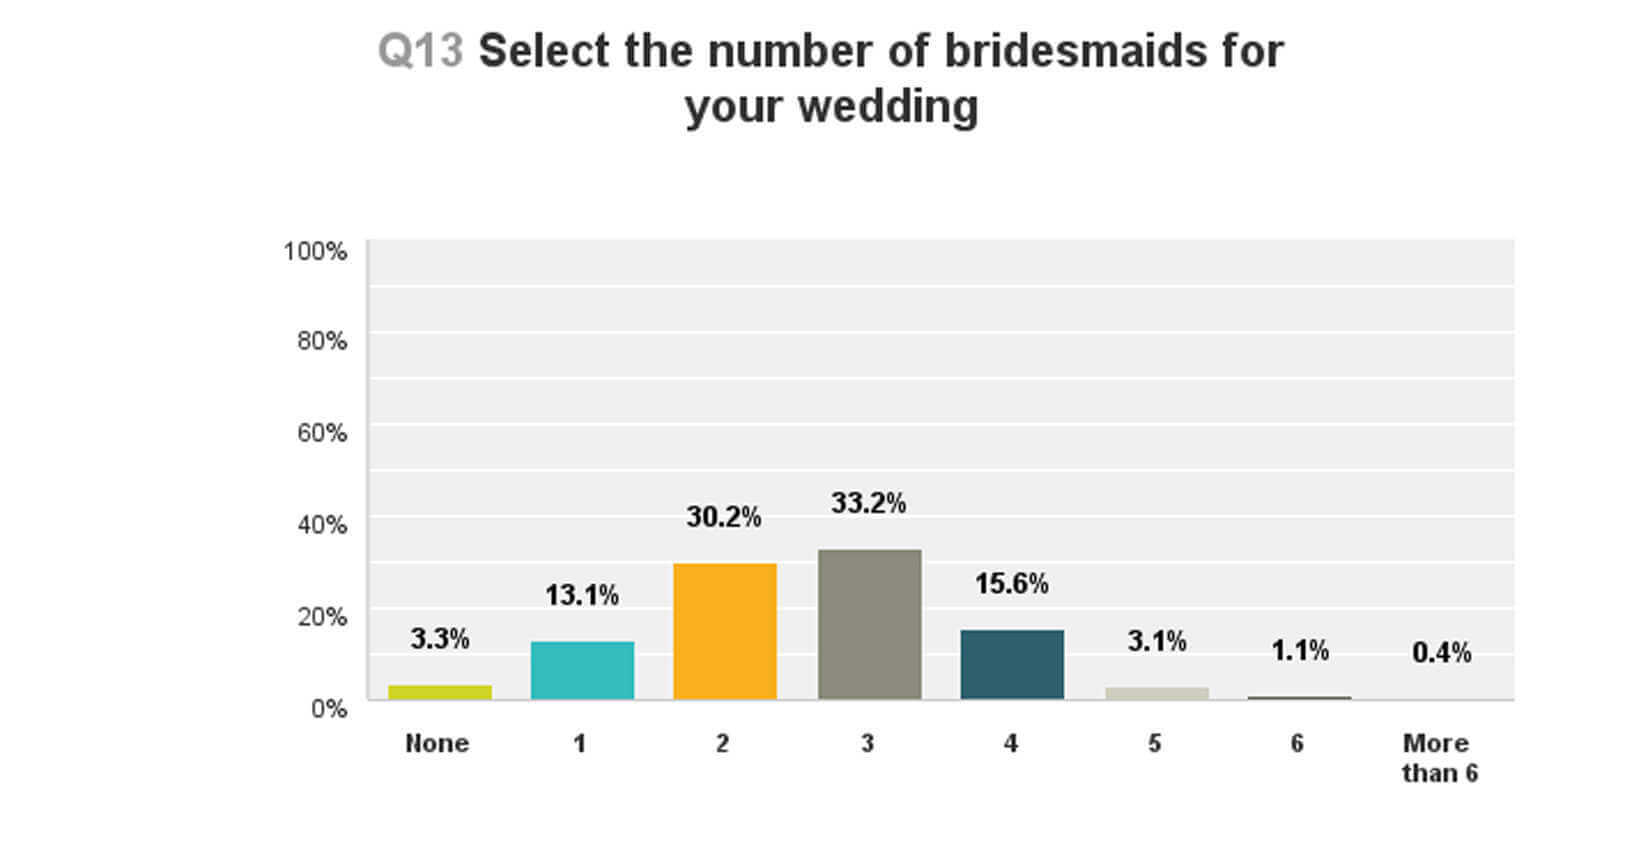 how many bridesmaids will you have at your wedding